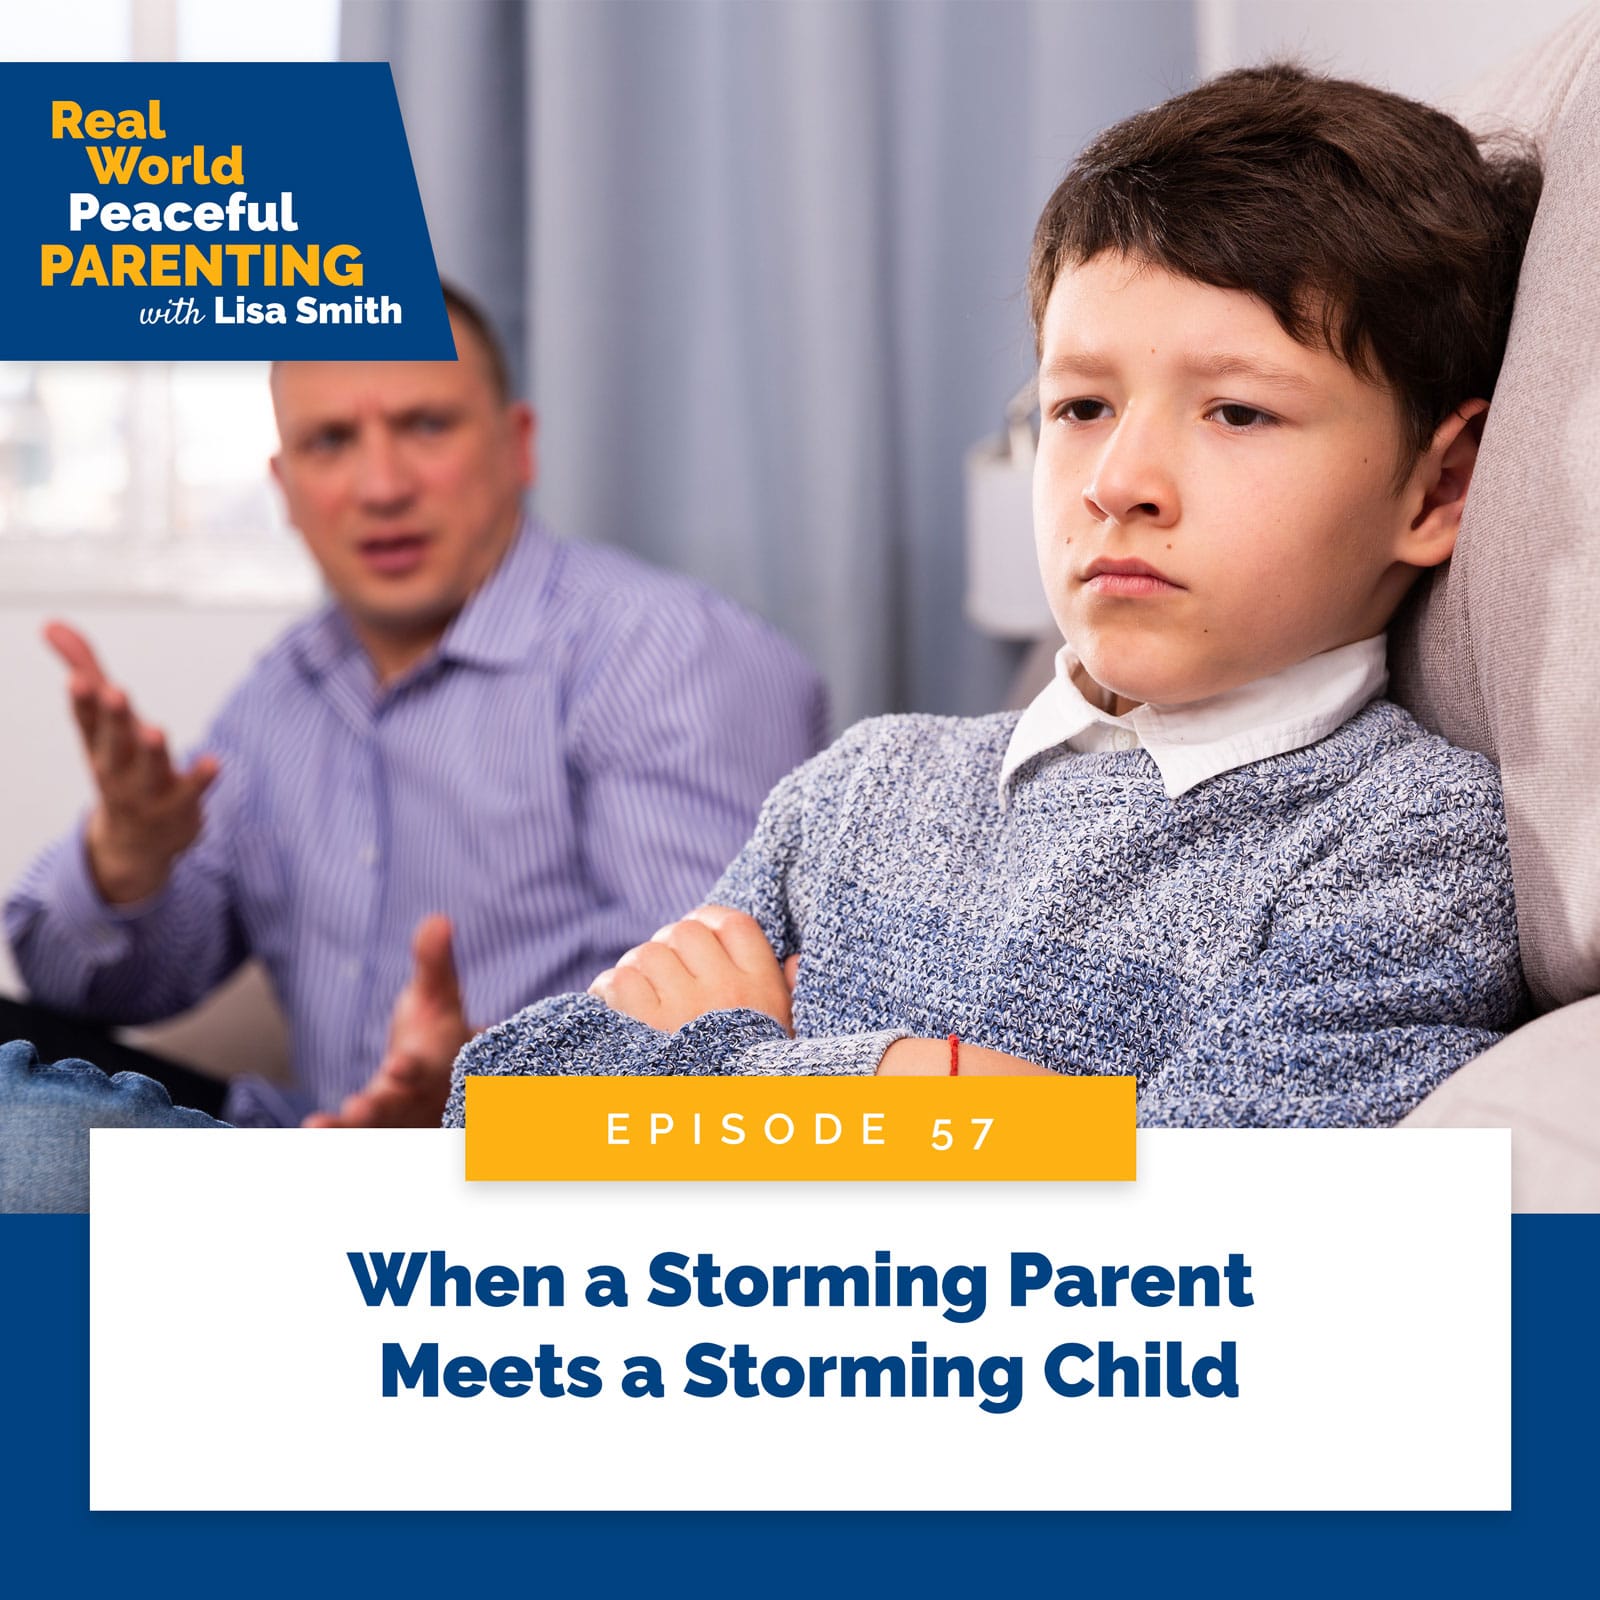 Real World Peaceful Parenting with Lisa Smith | When a Storming Parent Meets a Storming Child